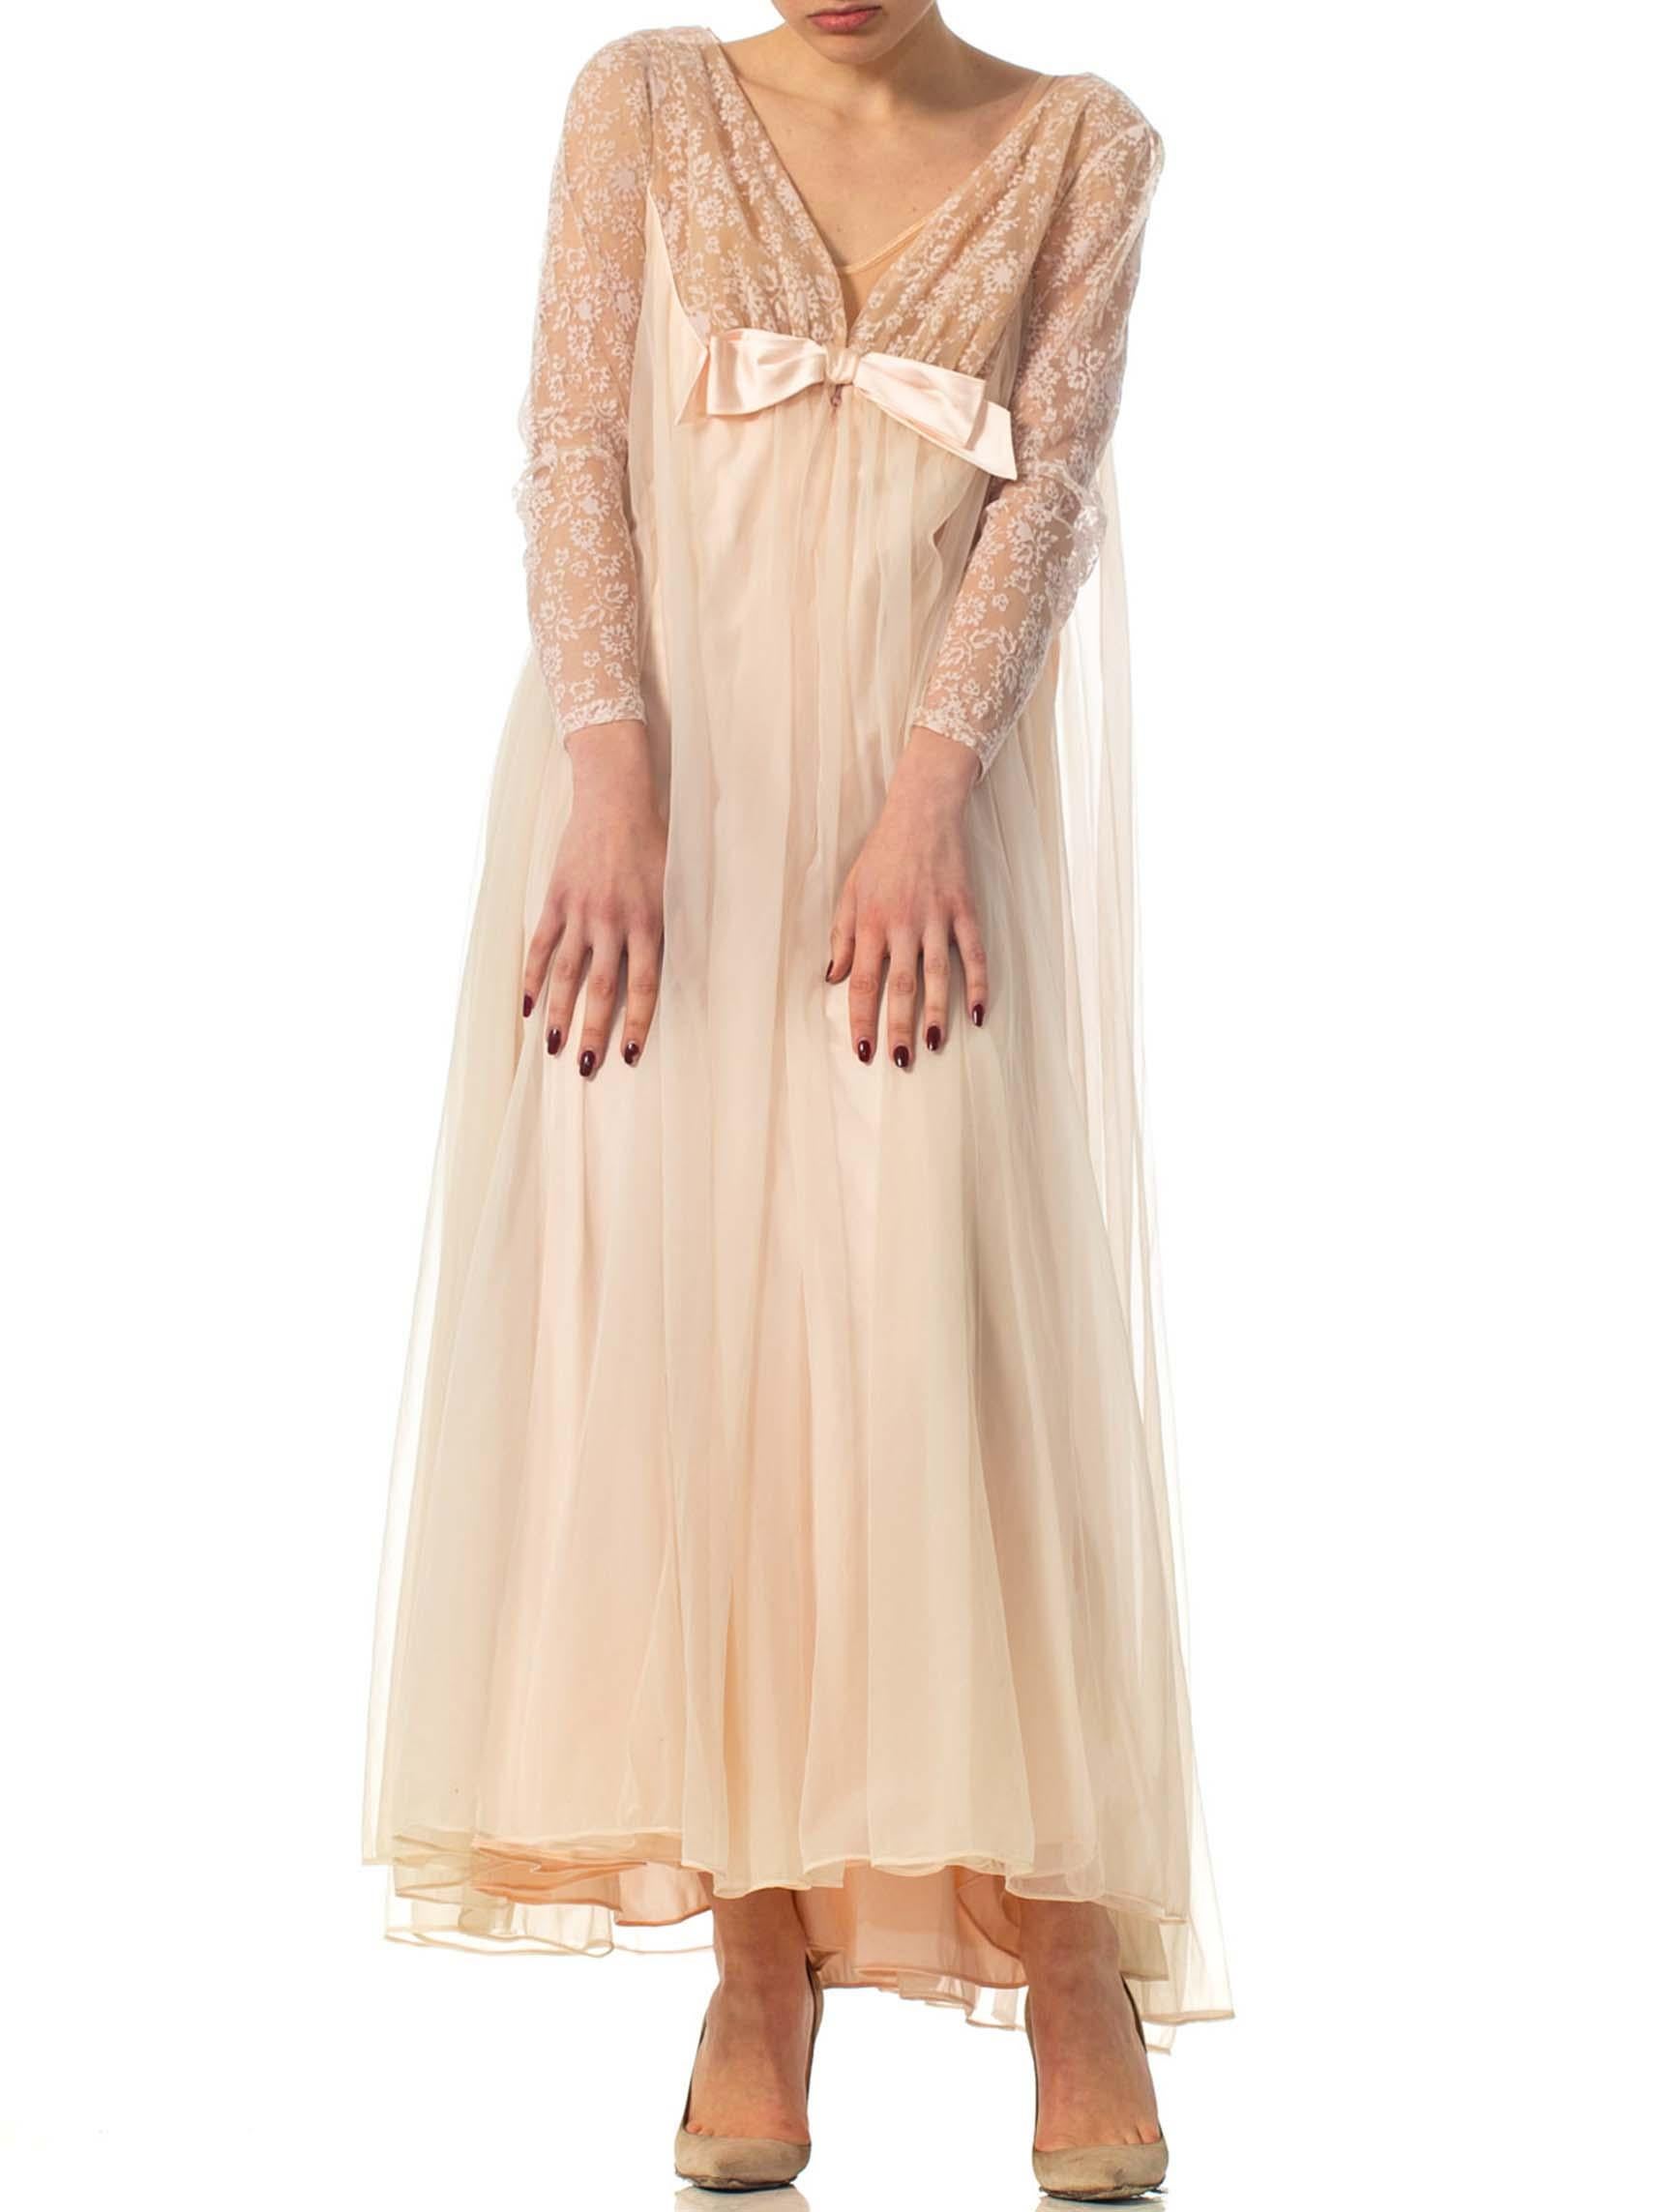 Women's 1960S Nude Nylon Chiffon Jersey Romantic Negligee House Dress With Sleeves For Sale